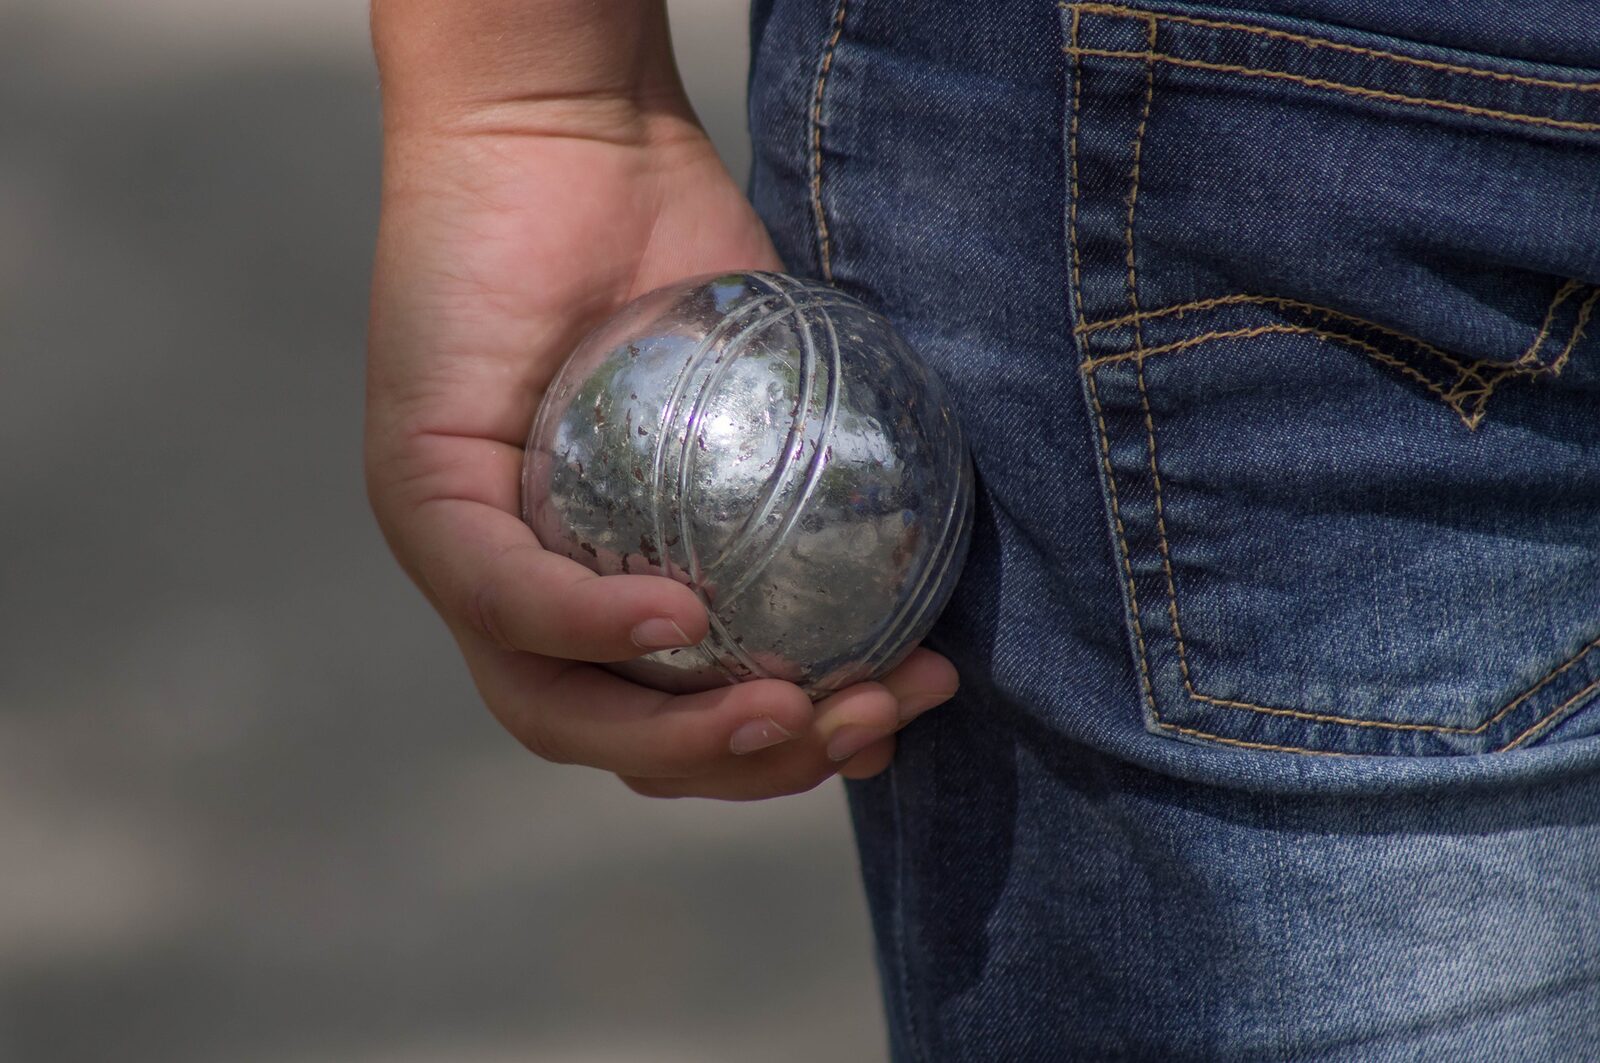 Pétanque | The game with the balls